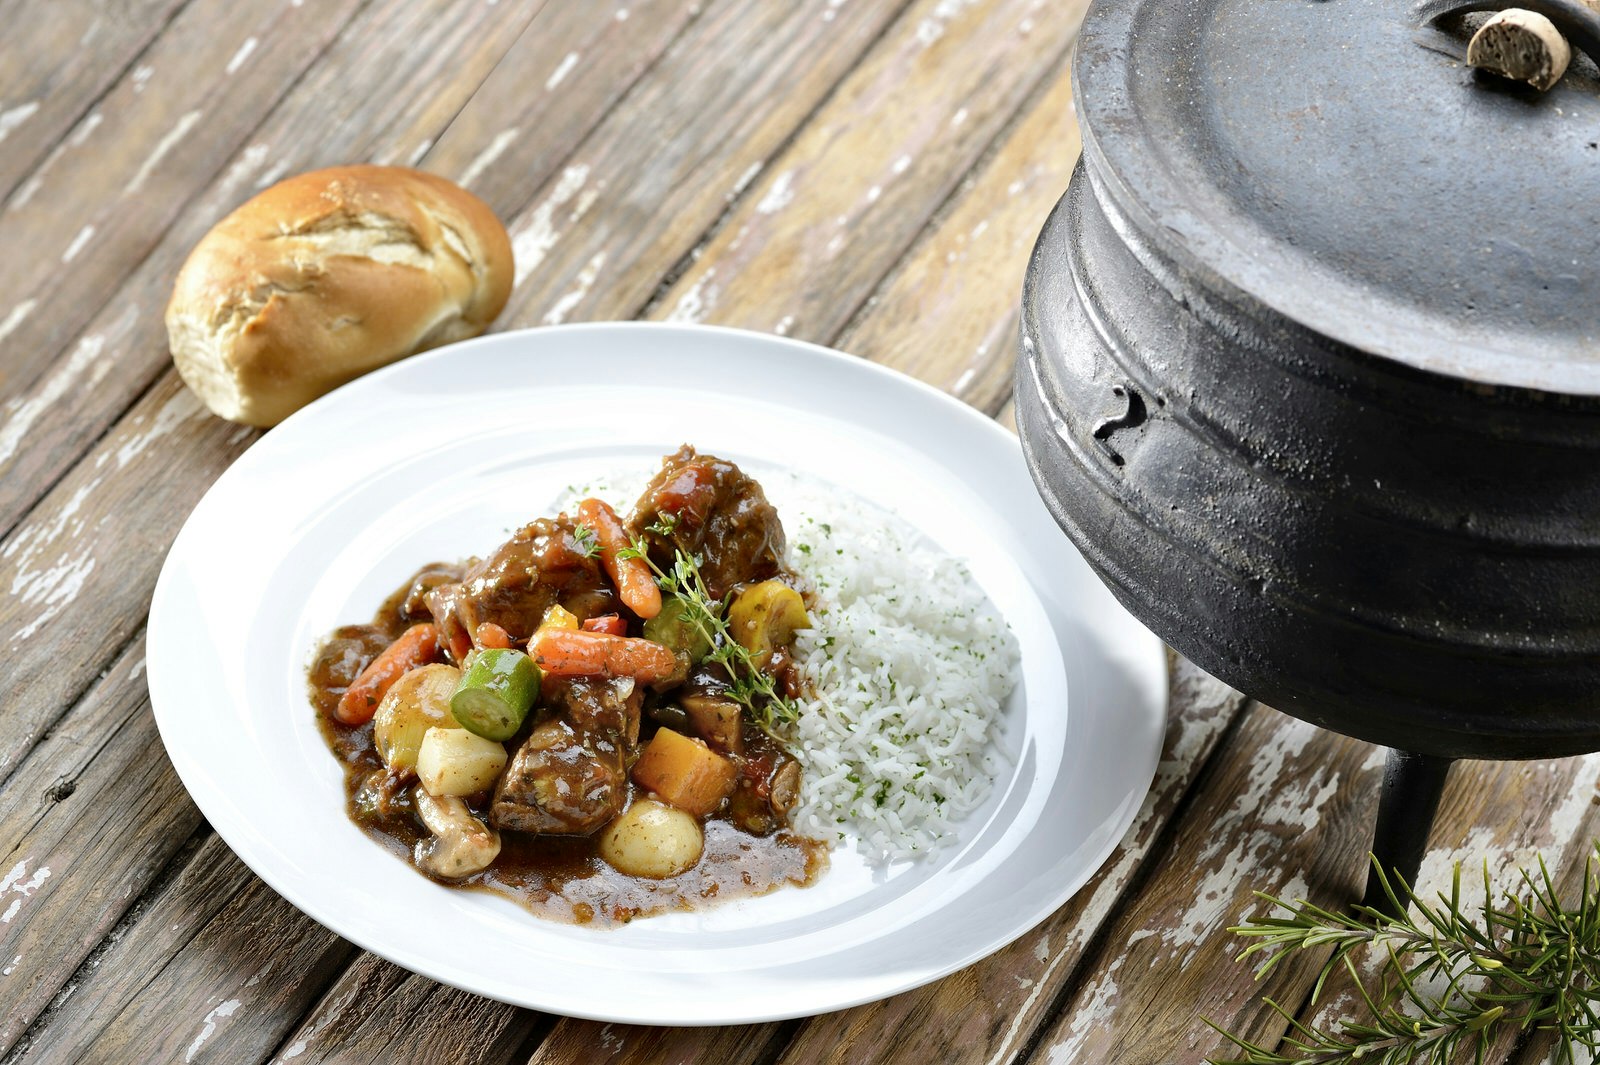 A bread roll sits on a wooden-plank table next to a white plate topped with white rice and a traditional ste of potatoes, carrots, greens and beef; sat next to both is a traditional three-legged cast iron pot (aka potije); a great warming meal for Cape Town in June